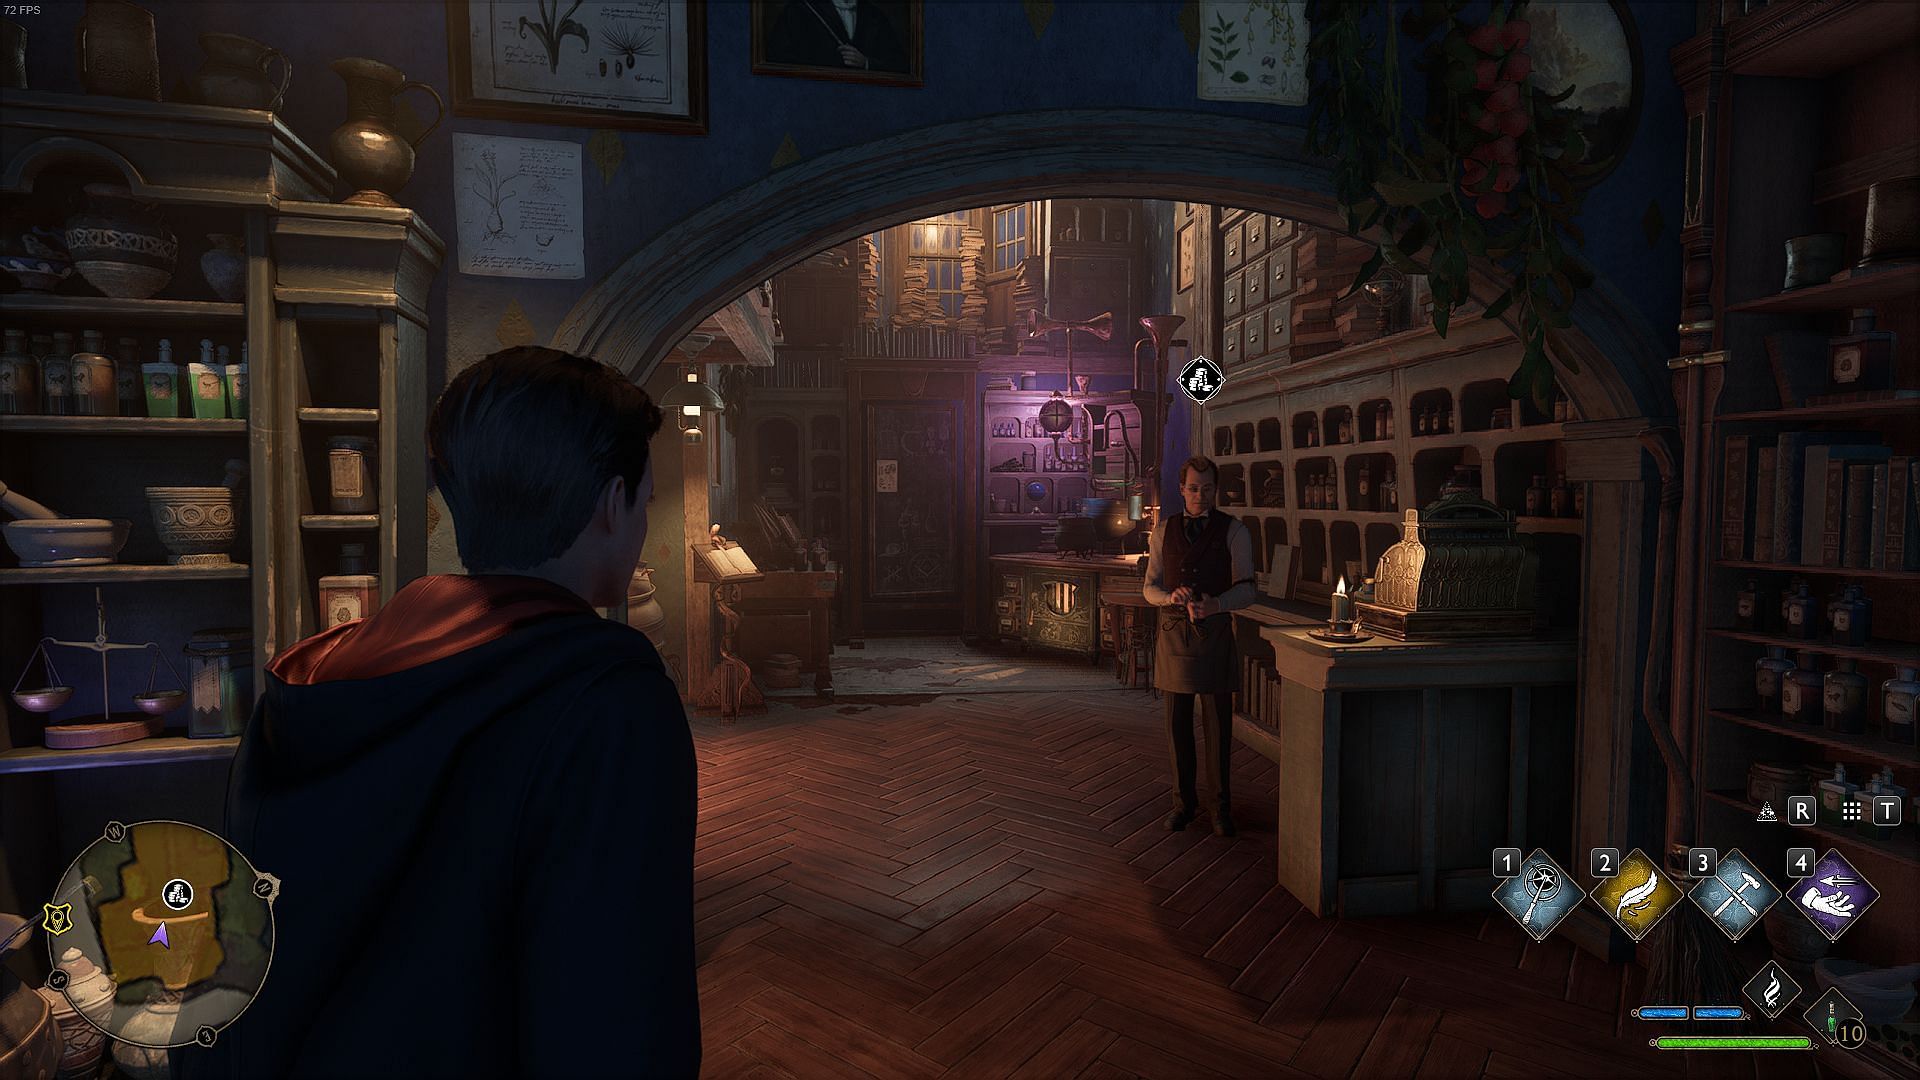 Inside Pippin&rsquo;s Potions (Image via Avalanche Software)